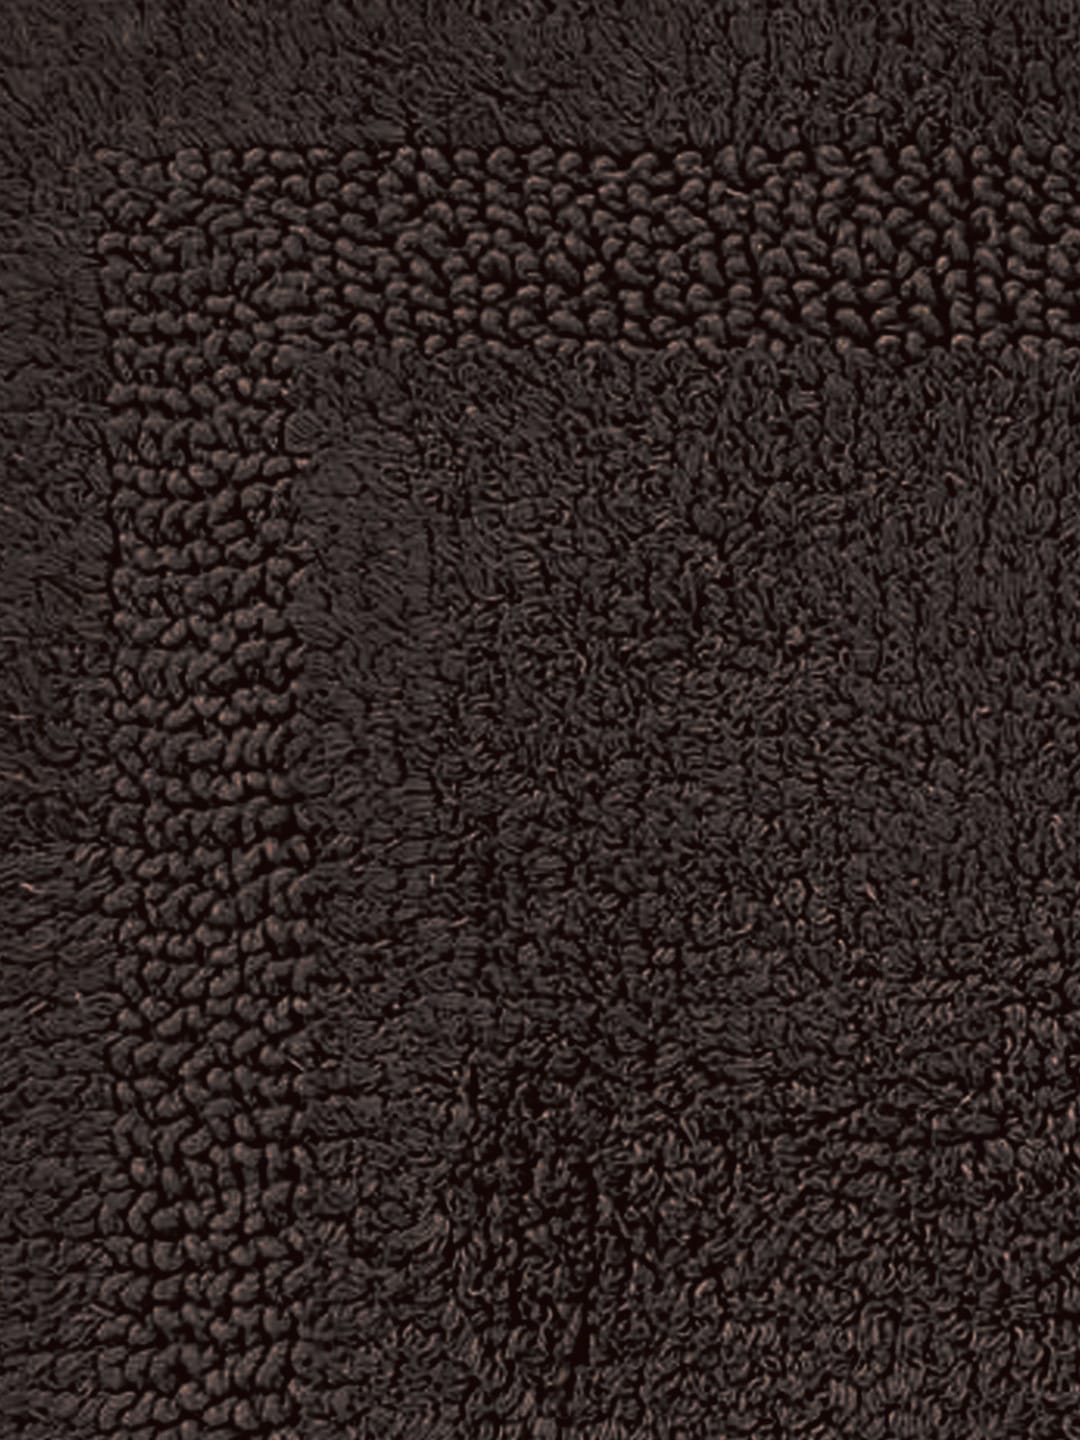 Non Slip Luxury Reversible Cotton Bathmat In Coffee Online At Best Prices